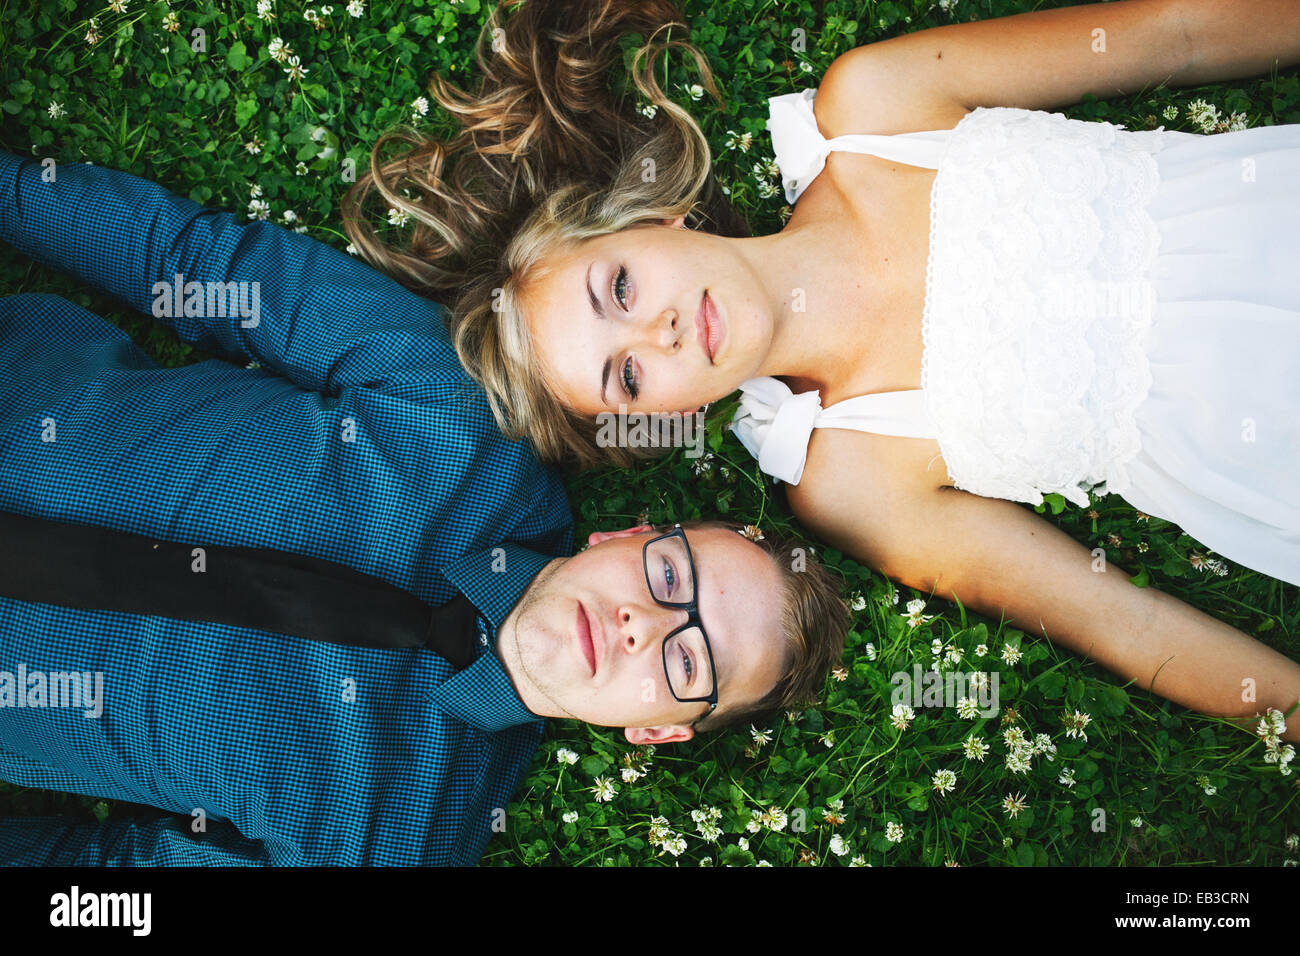 Overhead view of a couple lying on grass Stock Photo